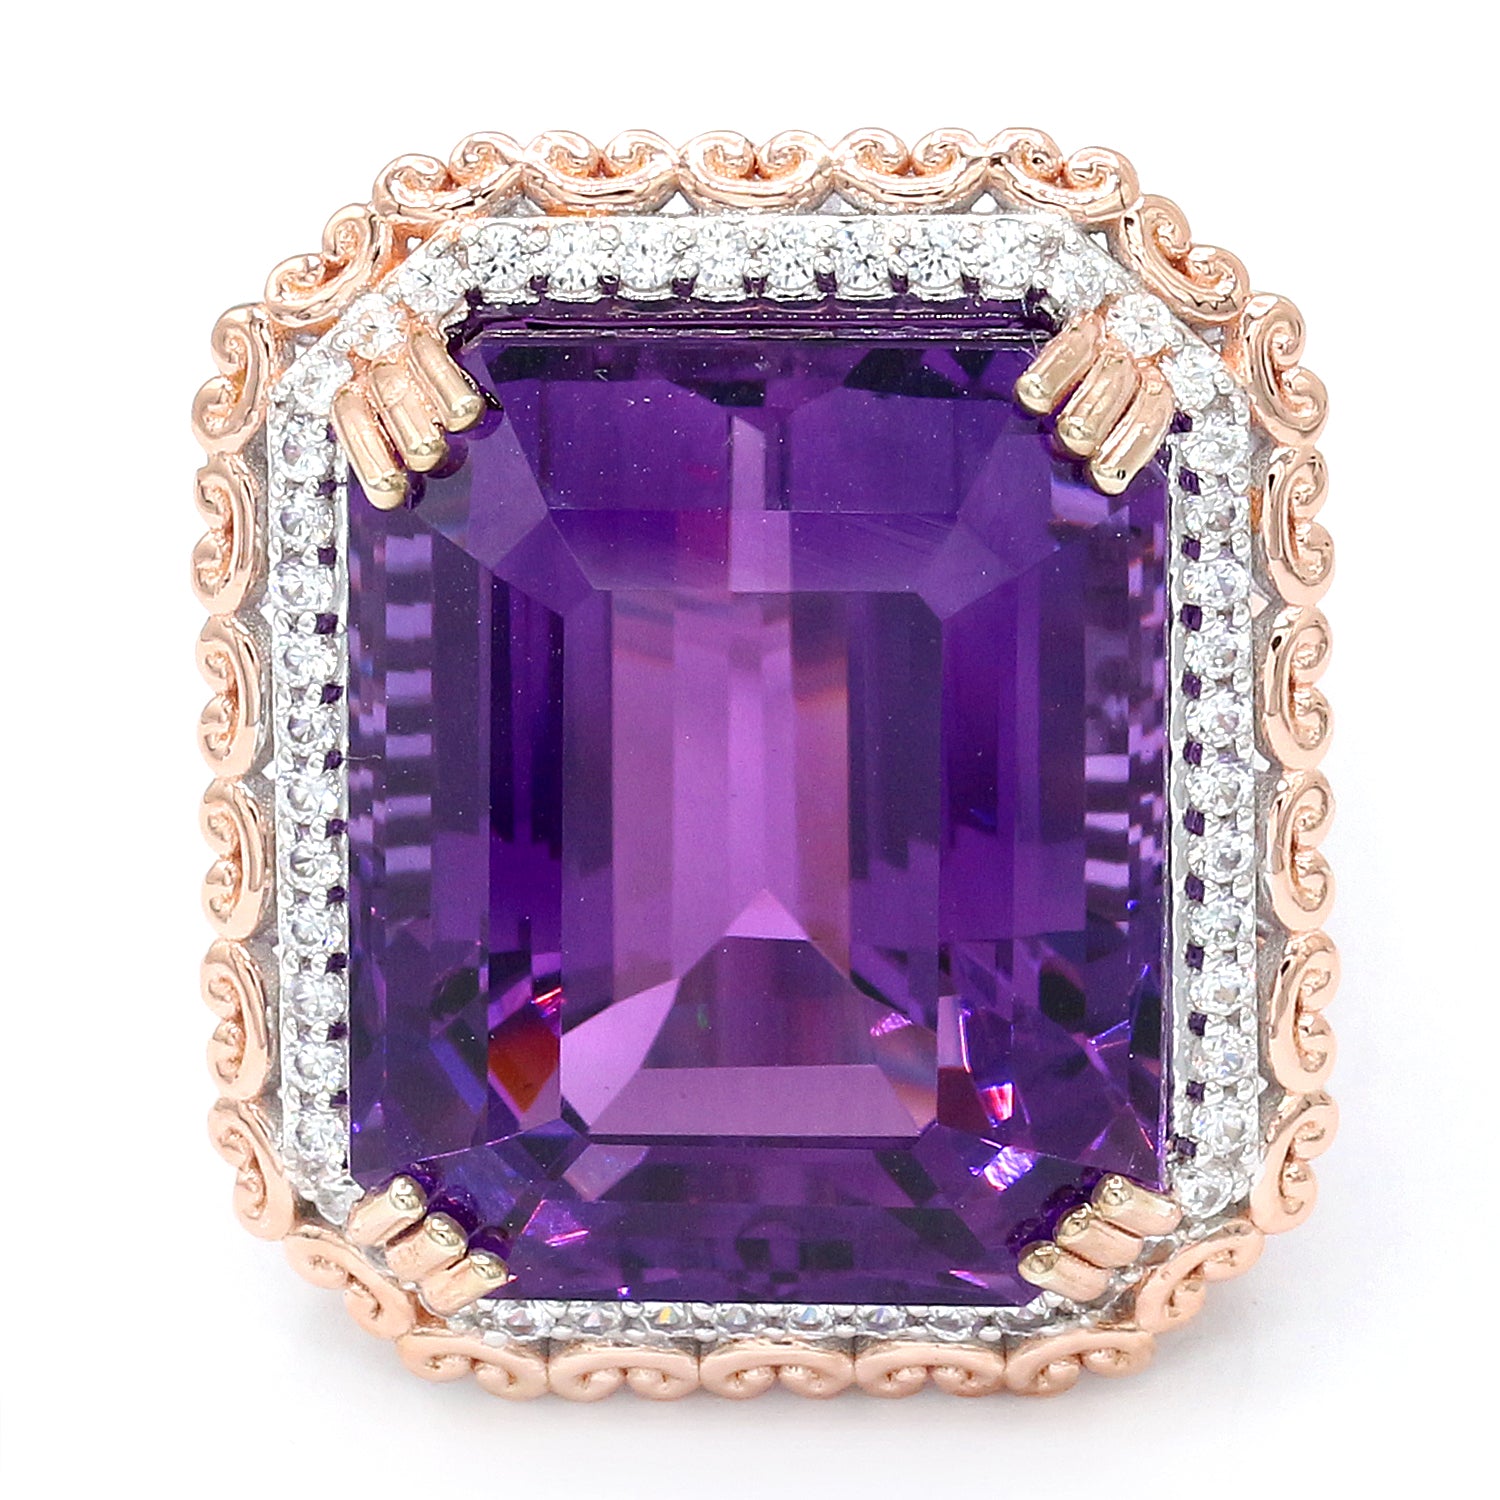 Limited Edition Gems en Vogue One-of-a-Kind 49.20ctw Namibian Amethyst & White Zircon Halo Honker Ring